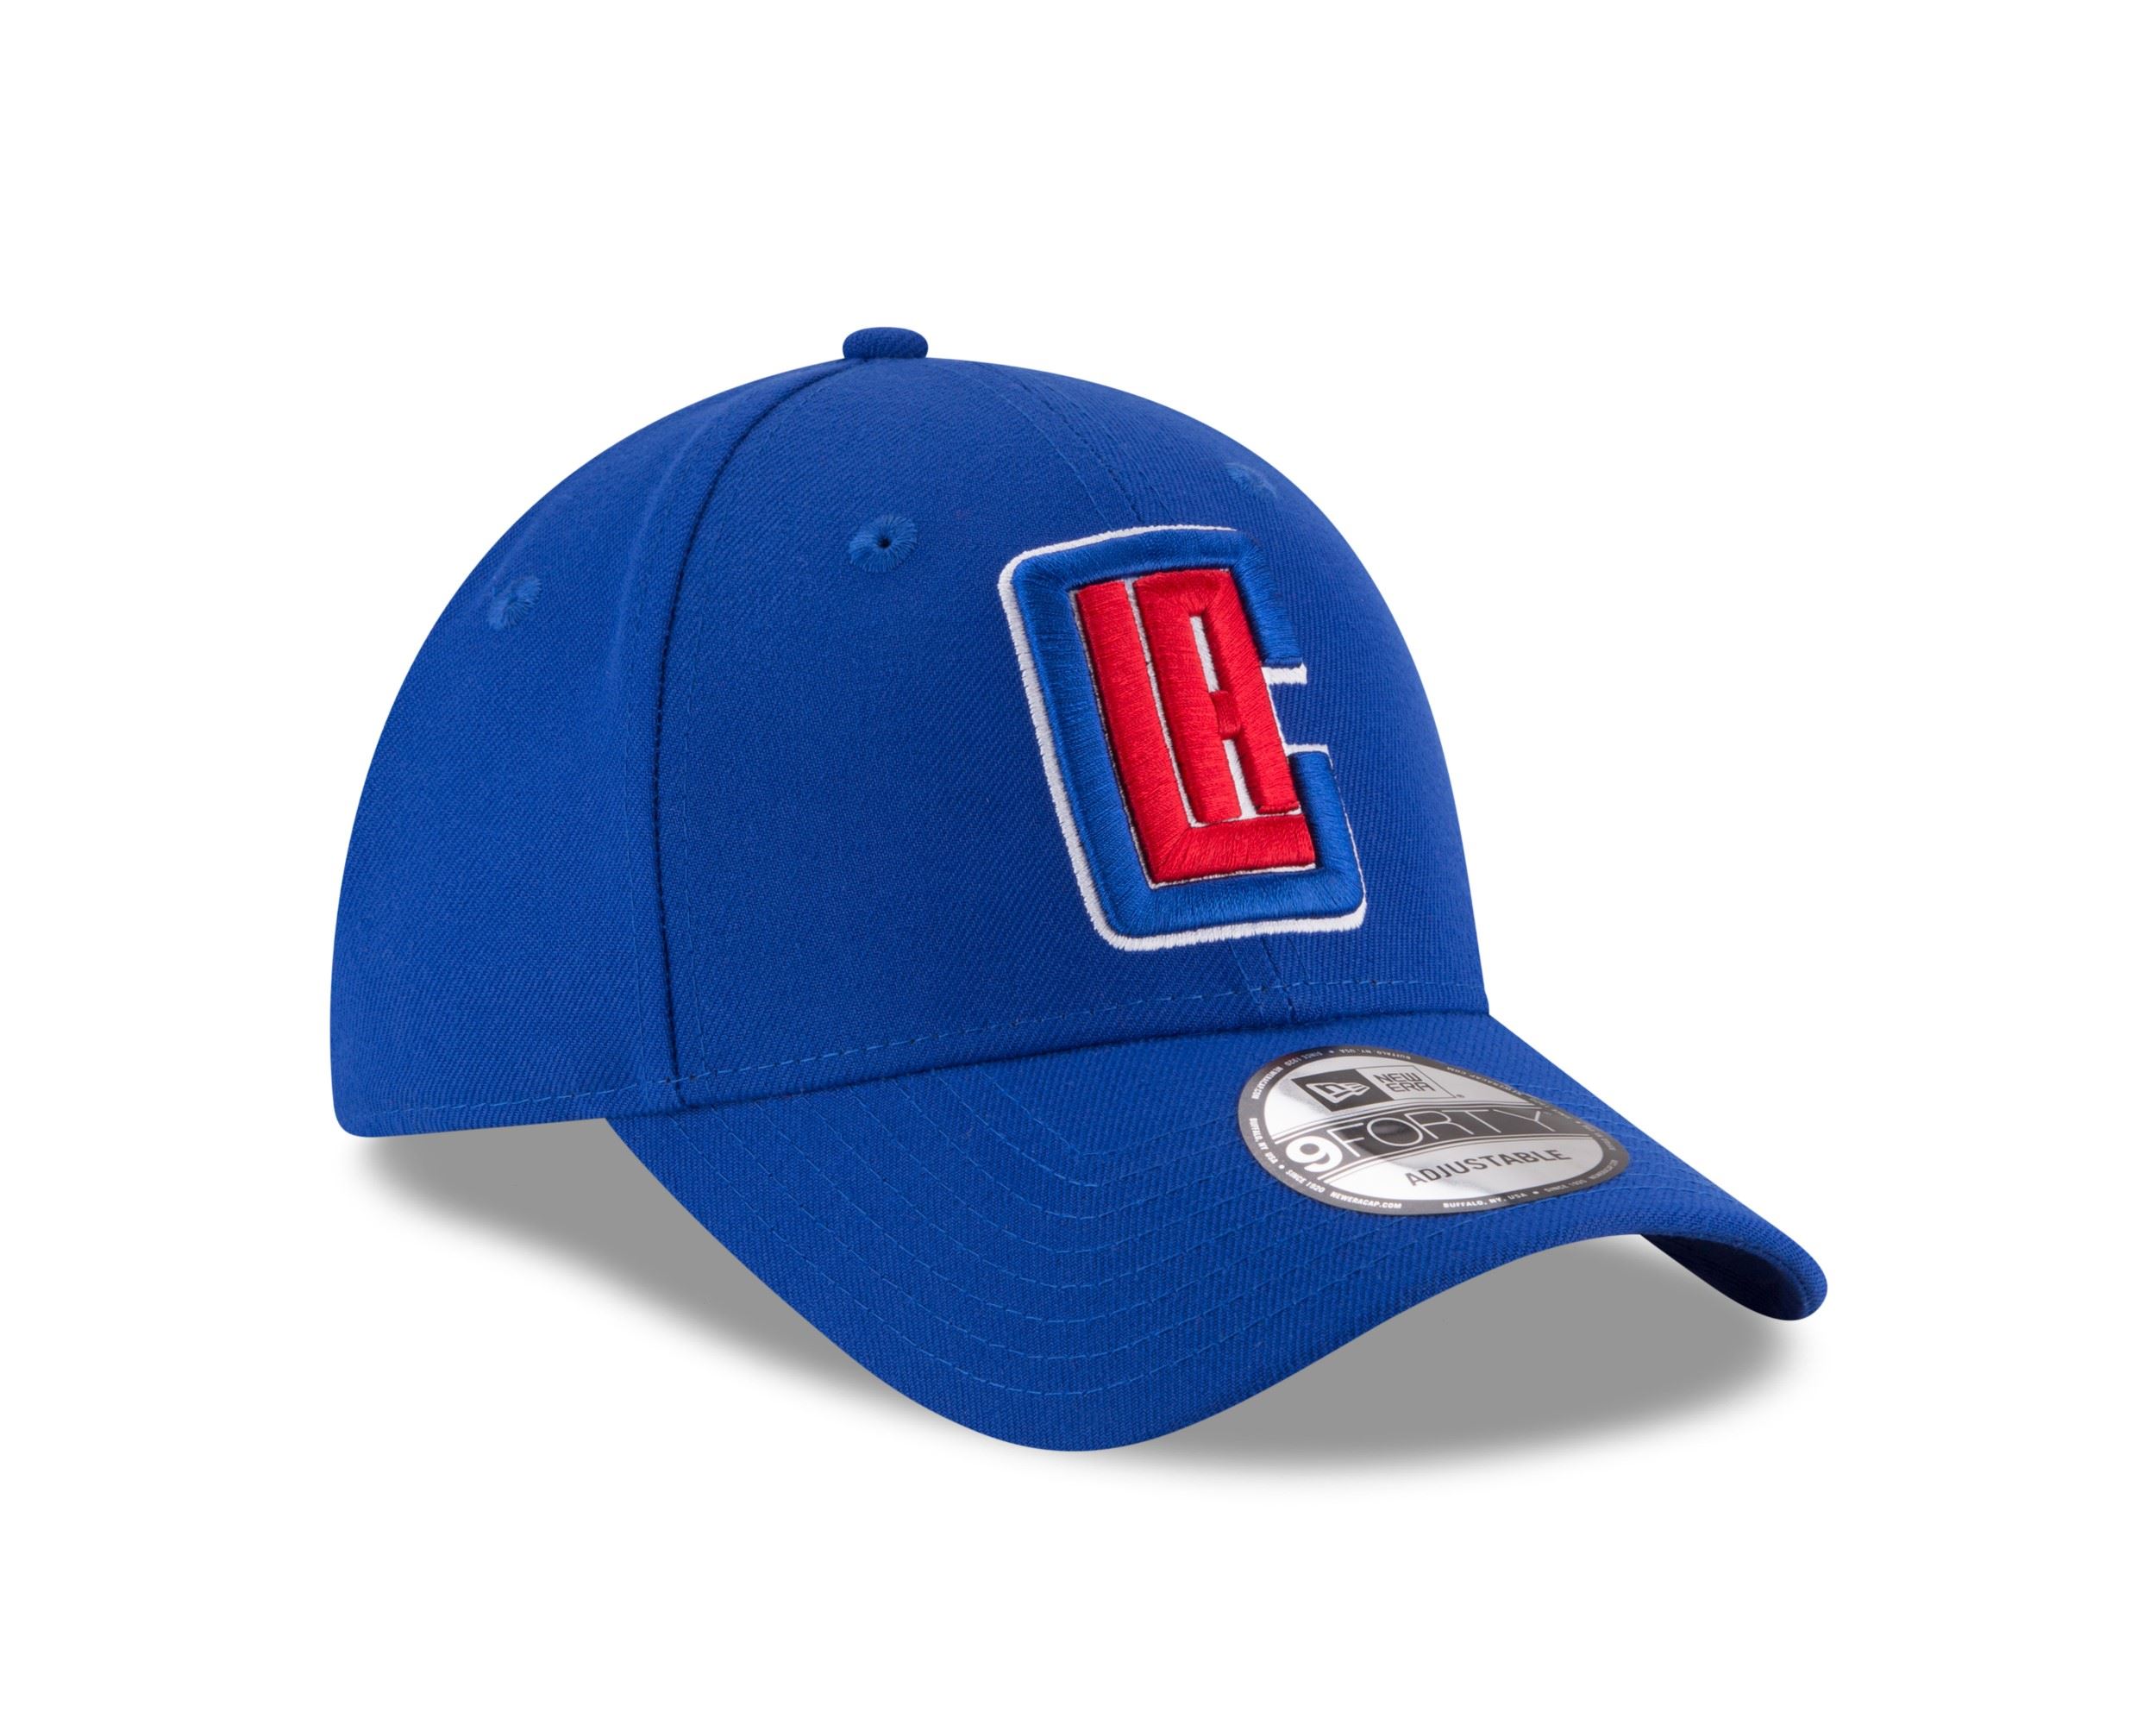 Los Angeles NBA Clippers The League 9Forty Adjustable Cap New Era